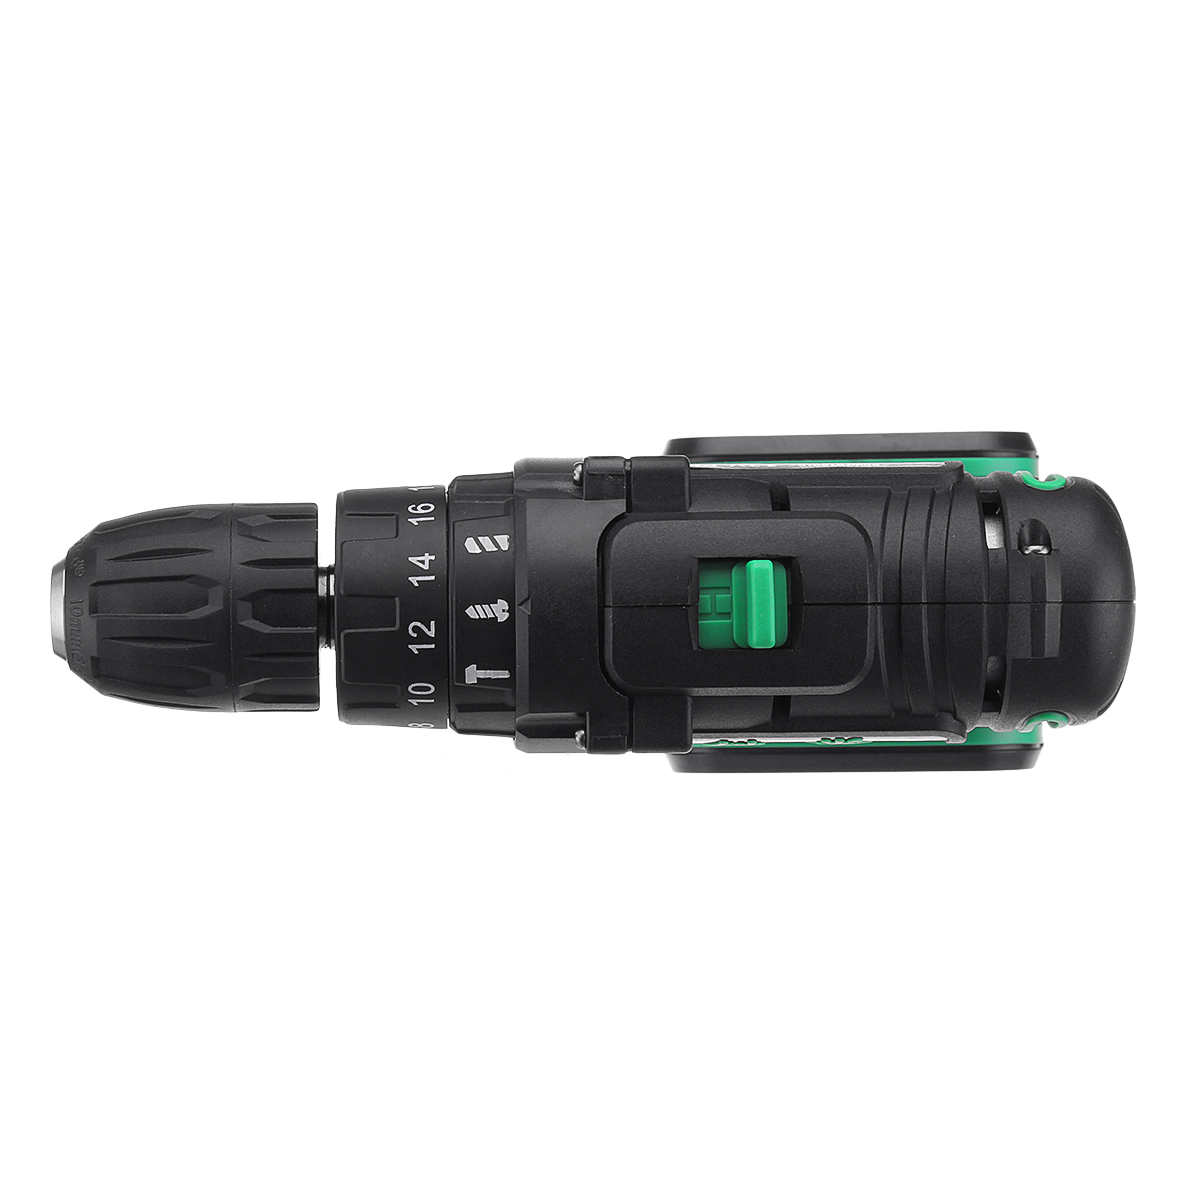 AC-100-240V-Lithium-Cordless-Electric-Screwdriver-Screw-Drill-Driver-Tool-15Ah-1-Charger-1-Battery-1286920-5